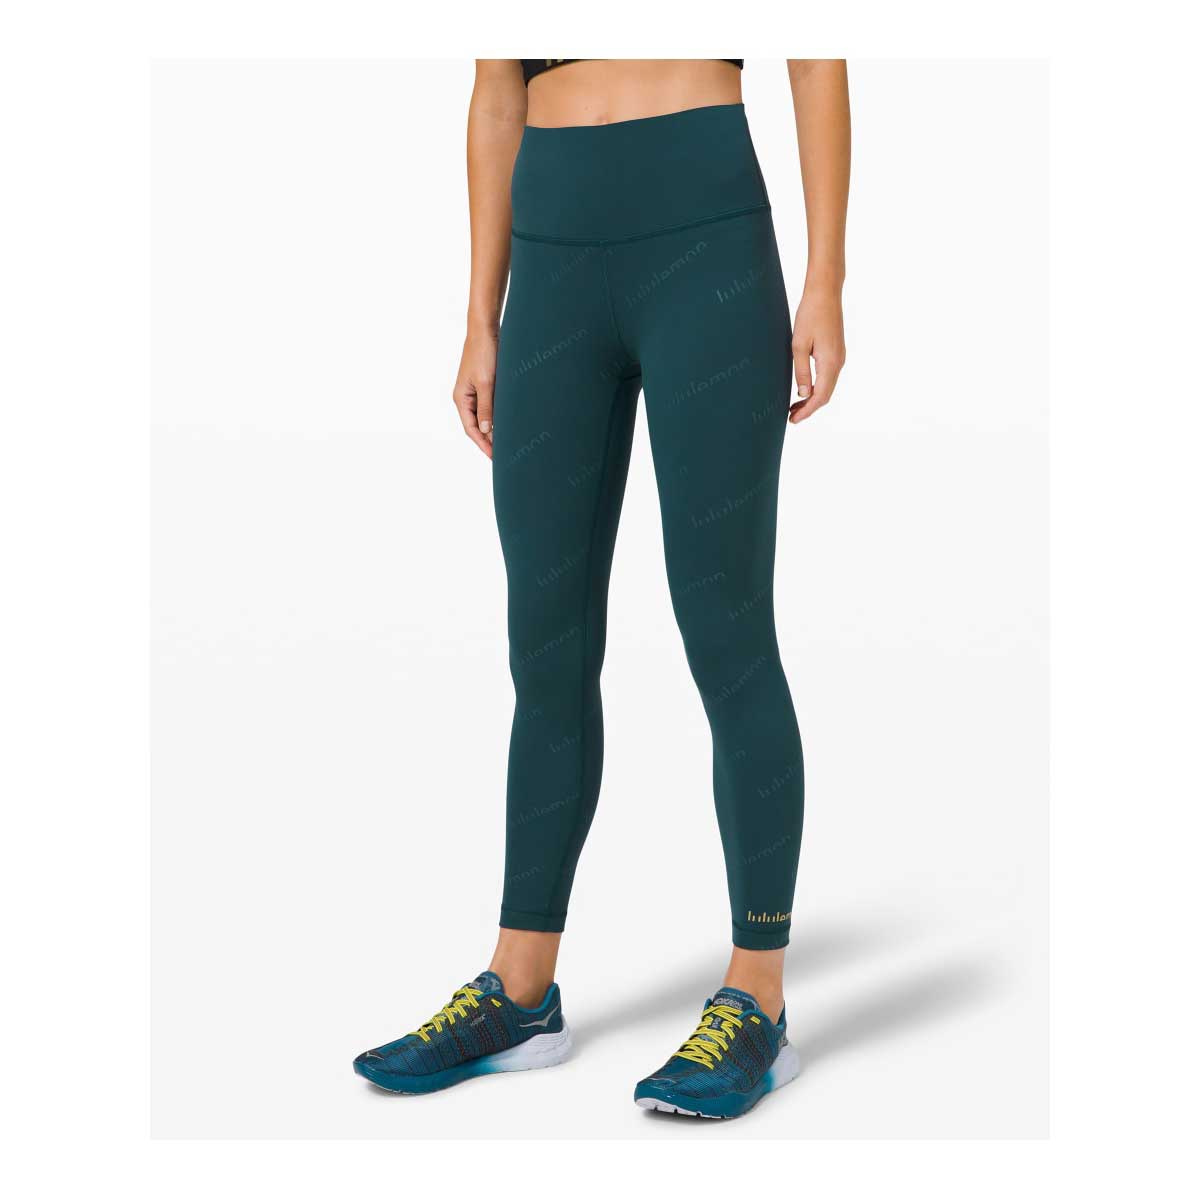 The 7 Best Compression Leggings to Fuel Your Compression Obsession